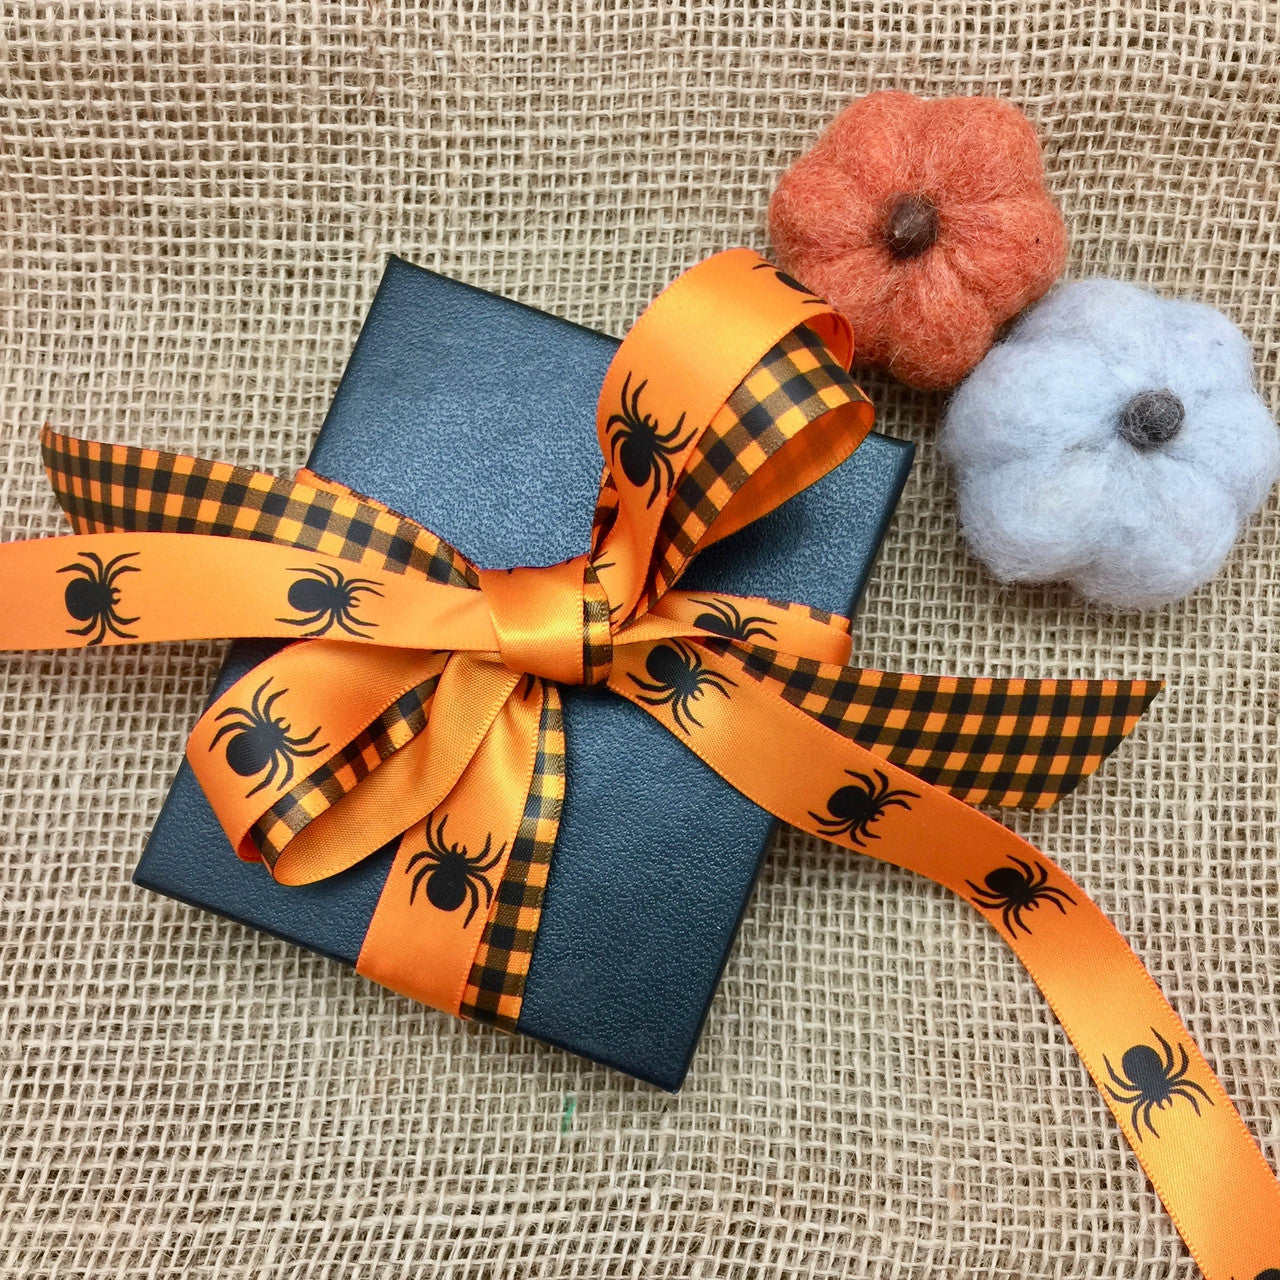 Mix and match our orange and black gingham with our spiders to make for a fun Halloween package!